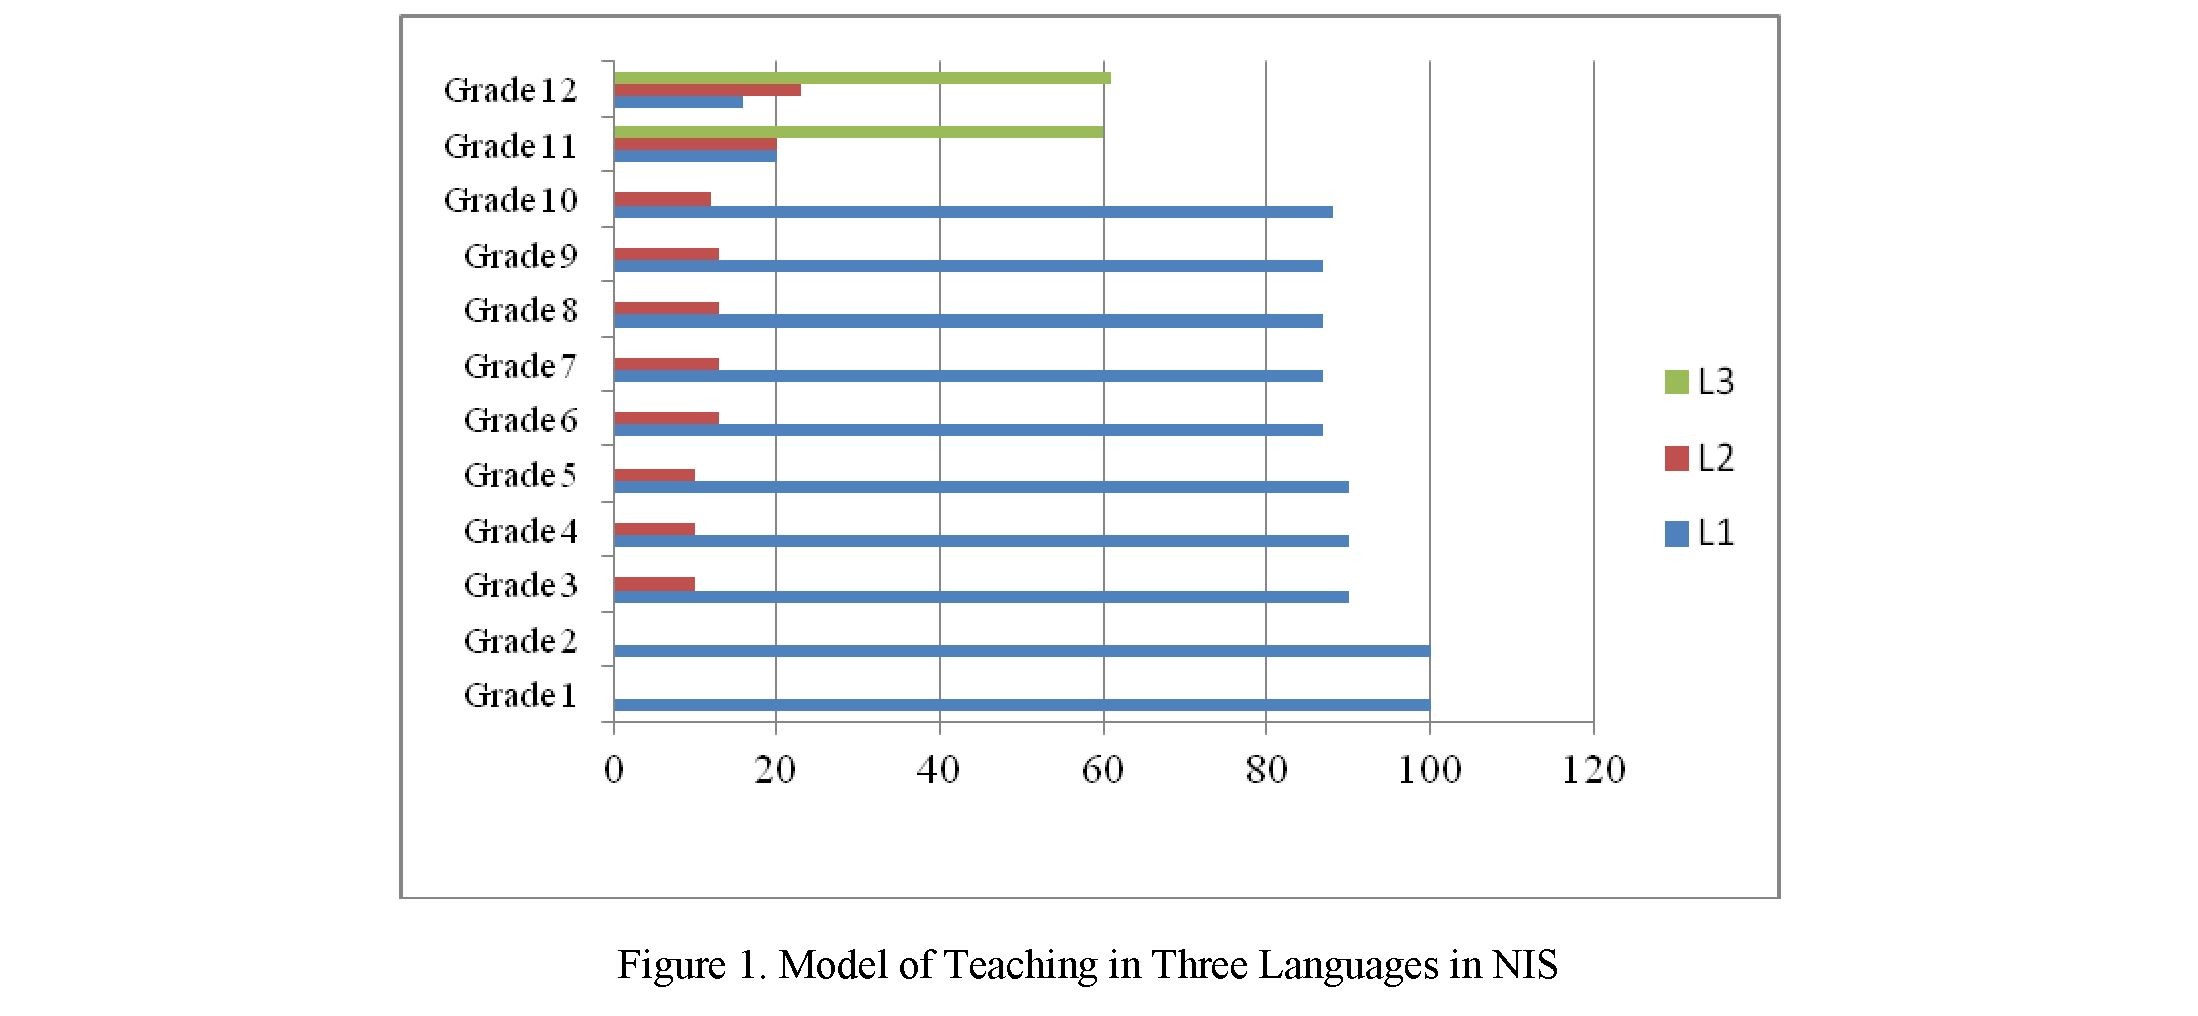 On Some Characteristics of Multilingualism through the Prism of the Education System